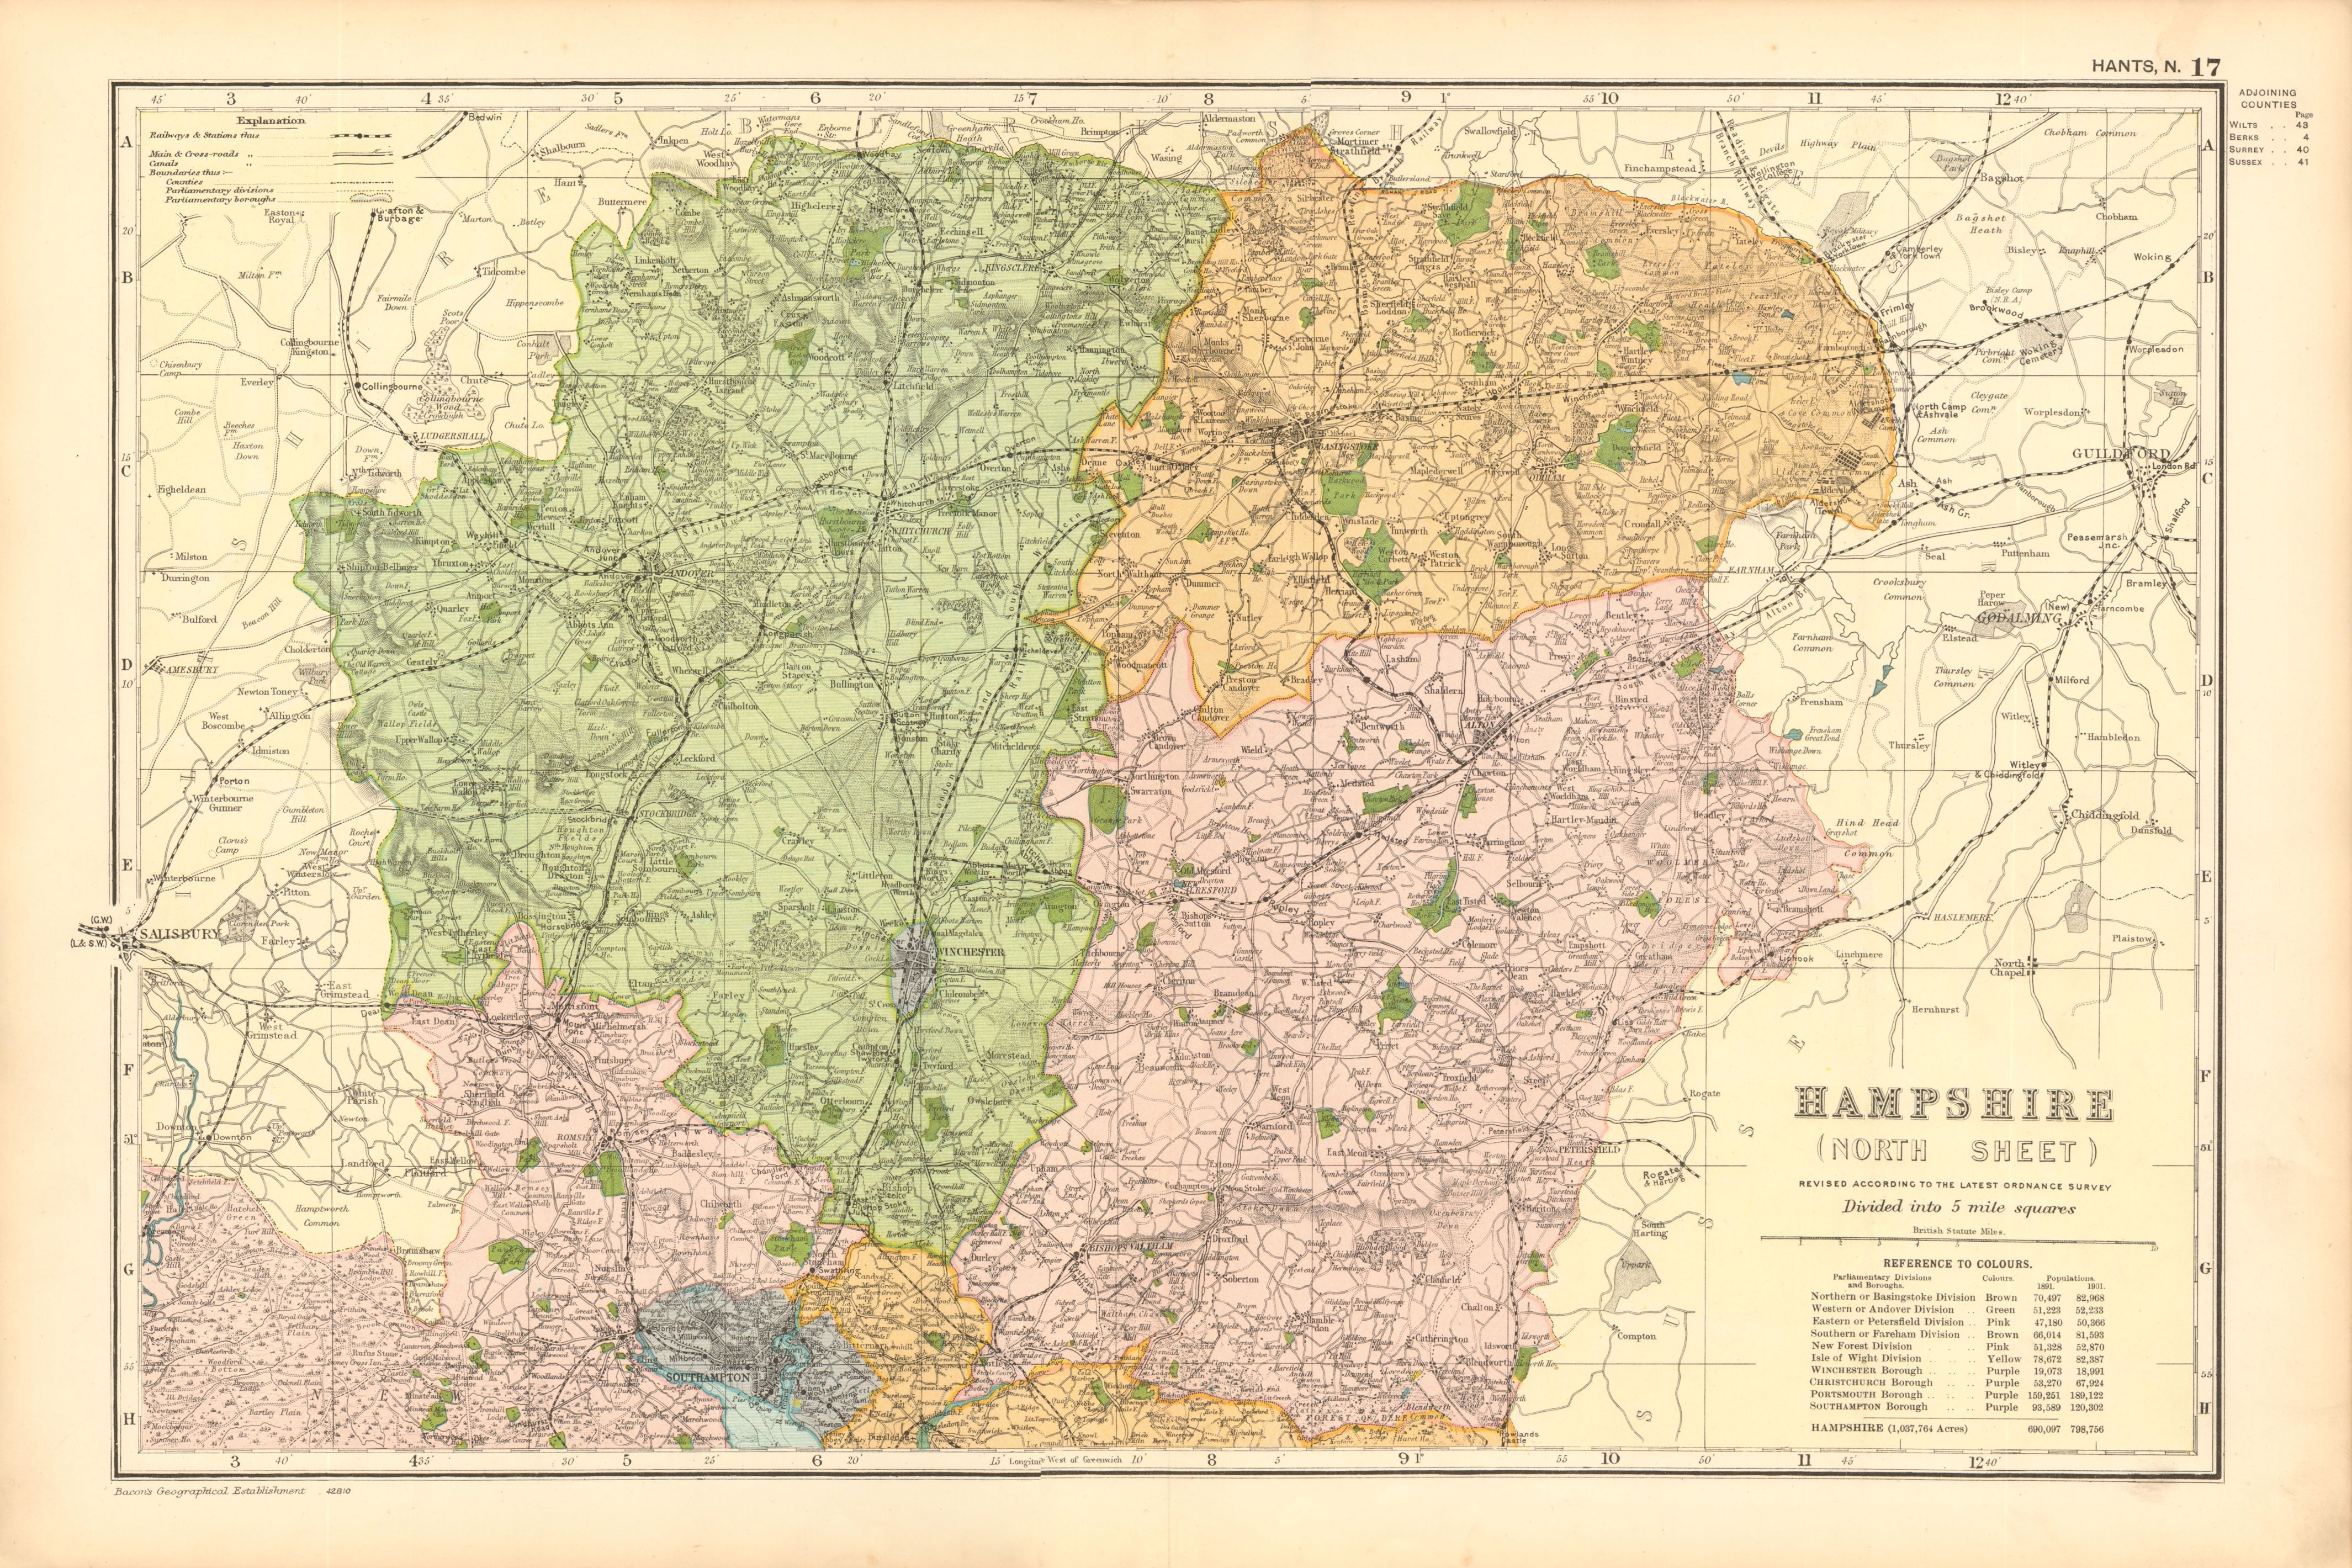 Associate Product HAMPSHIRE (NORTH). Showing Parliamentary divisions & parks. BACON 1904 old map